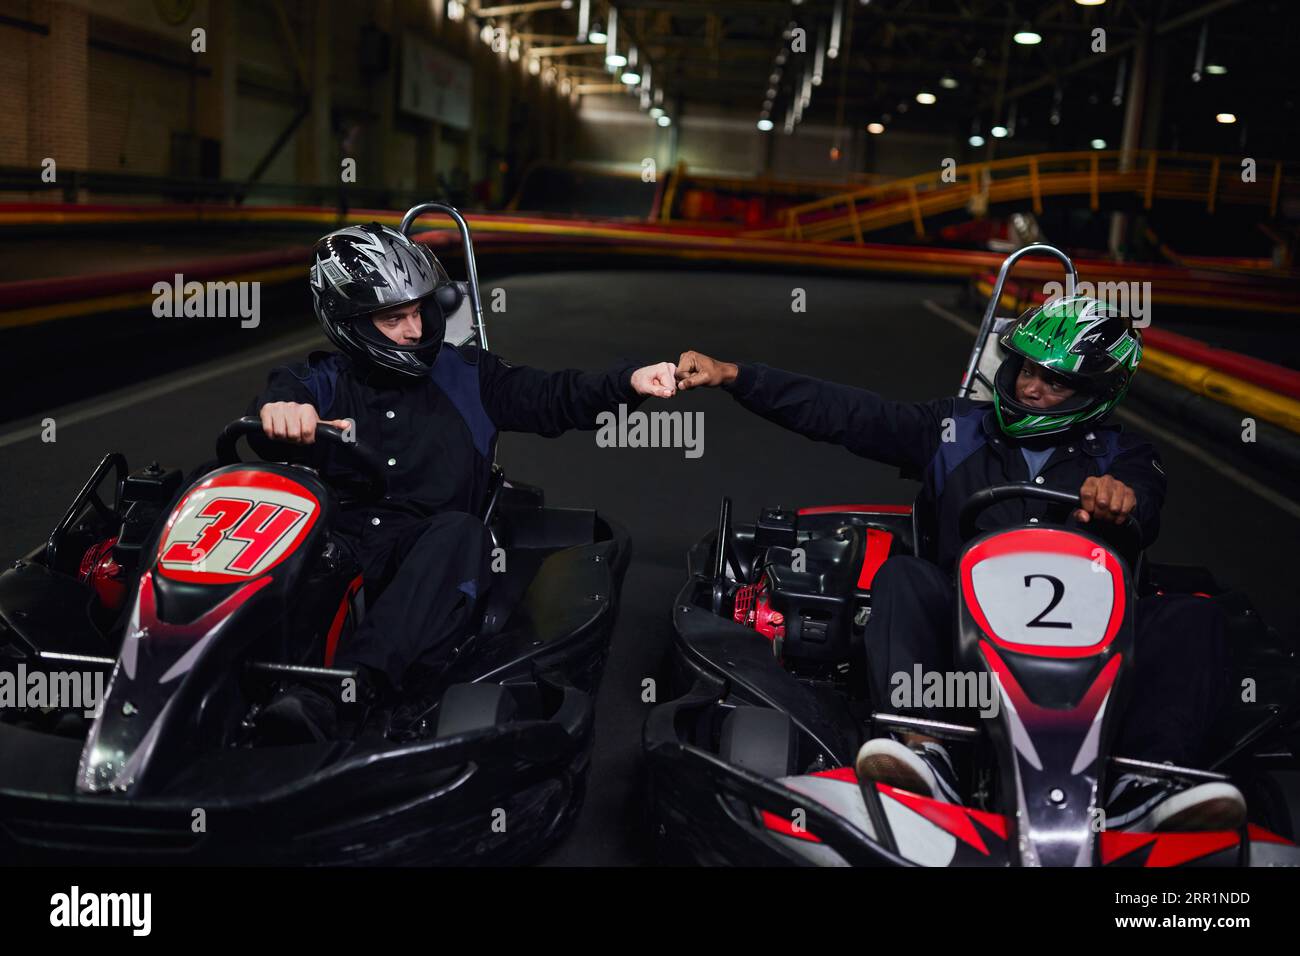 diverse go kart drivers in helmets fist bumping and sitting in sport cars for karting on circuit Stock Photo